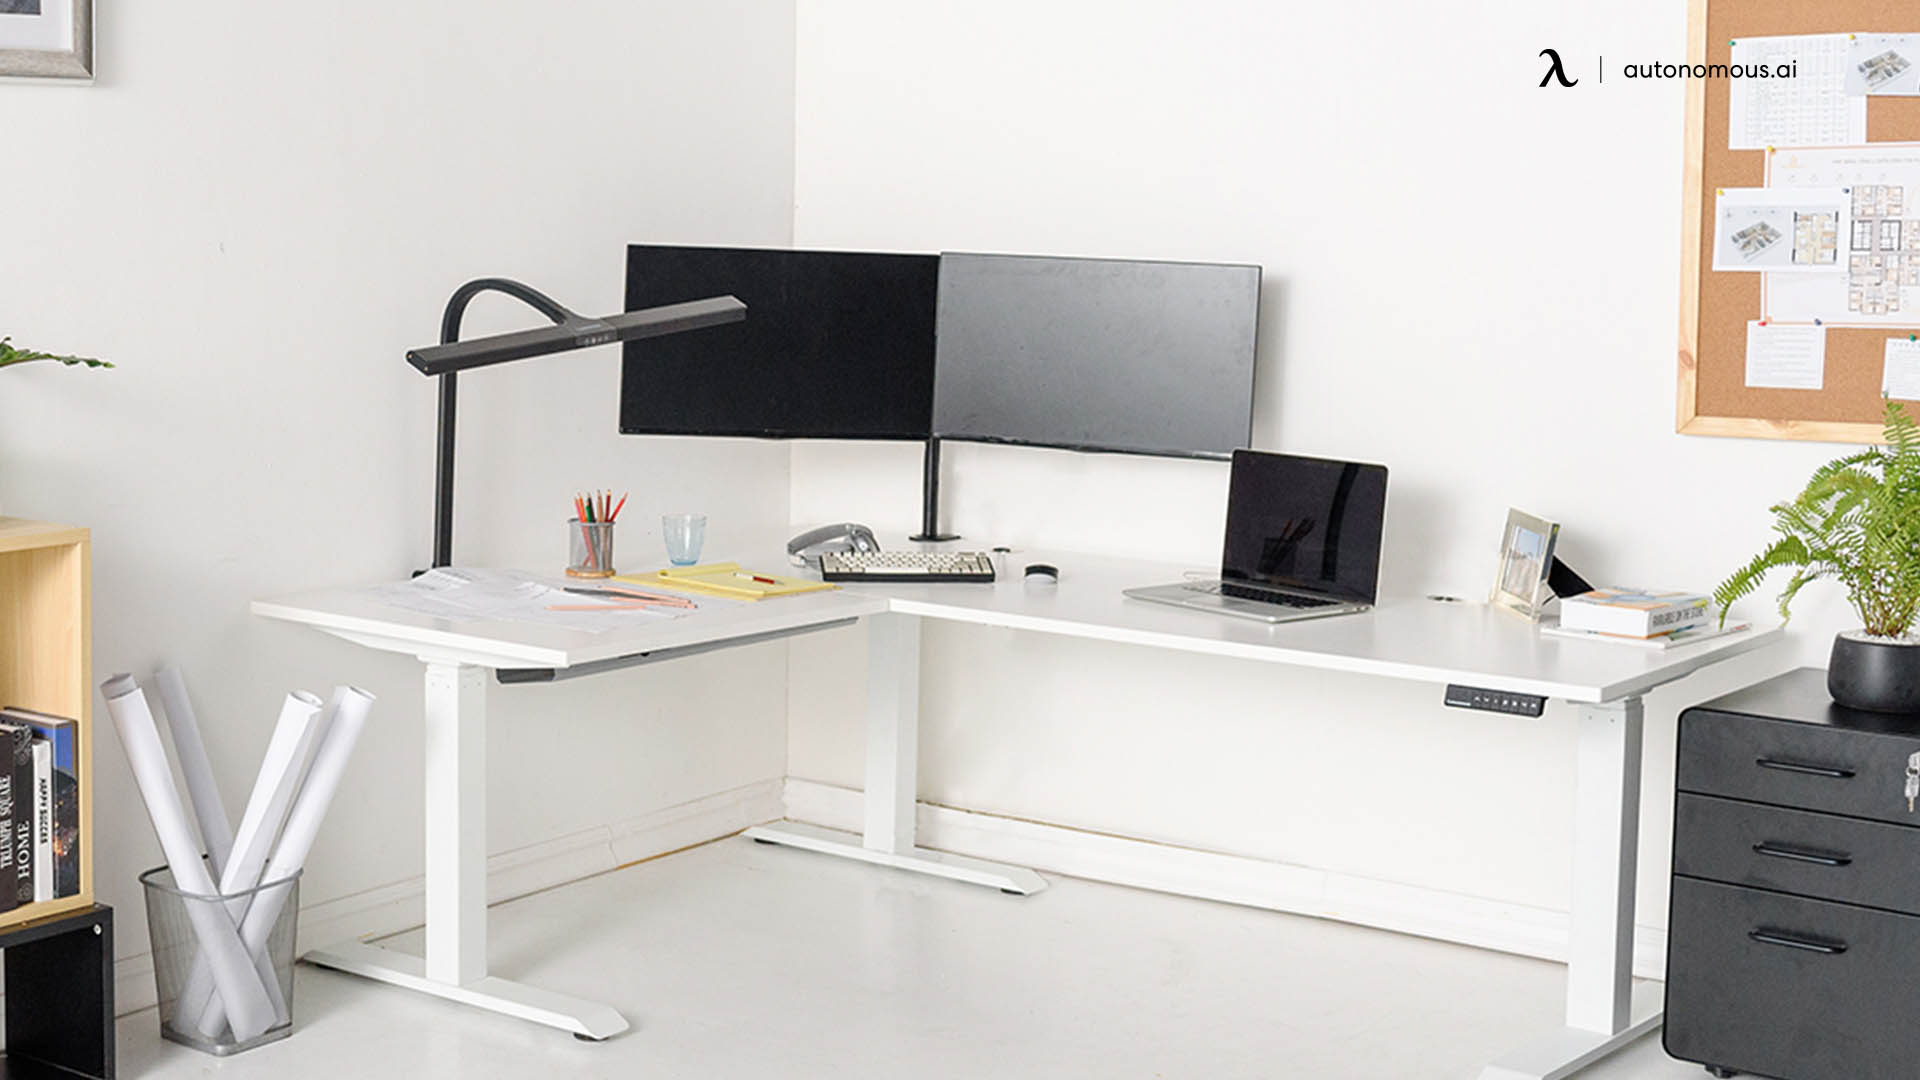 Is an L-shaped desk the same as a corner desk?